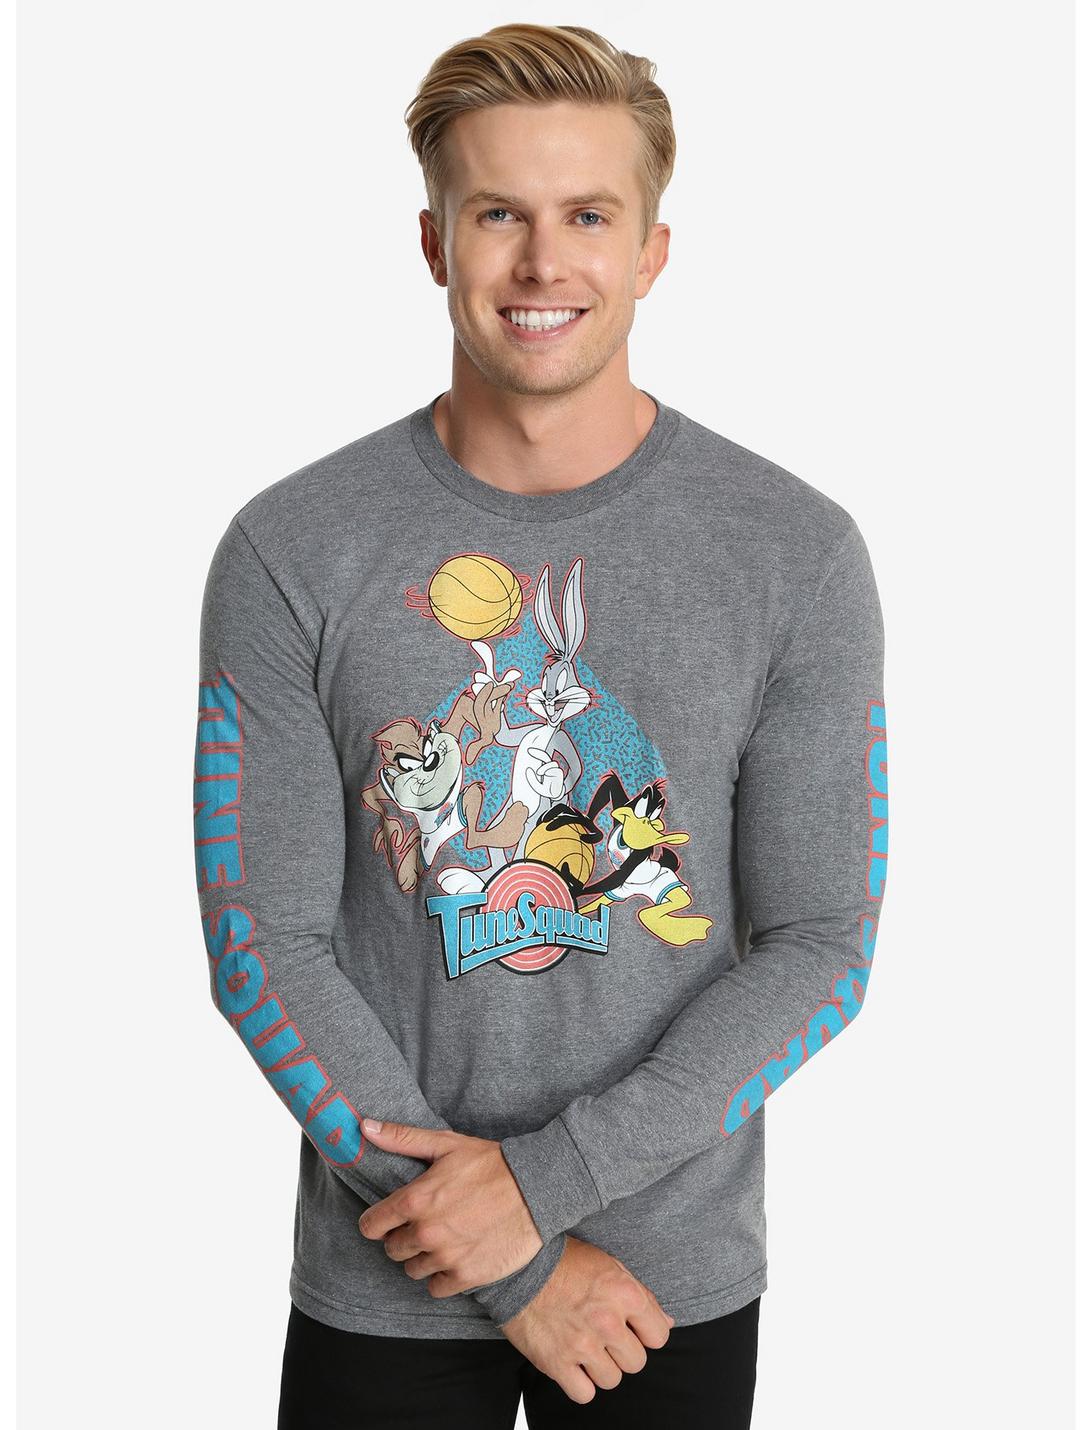 Space Jam Tune Squad Long Sleeve T-Shirt, HEATHER GREY, hi-res